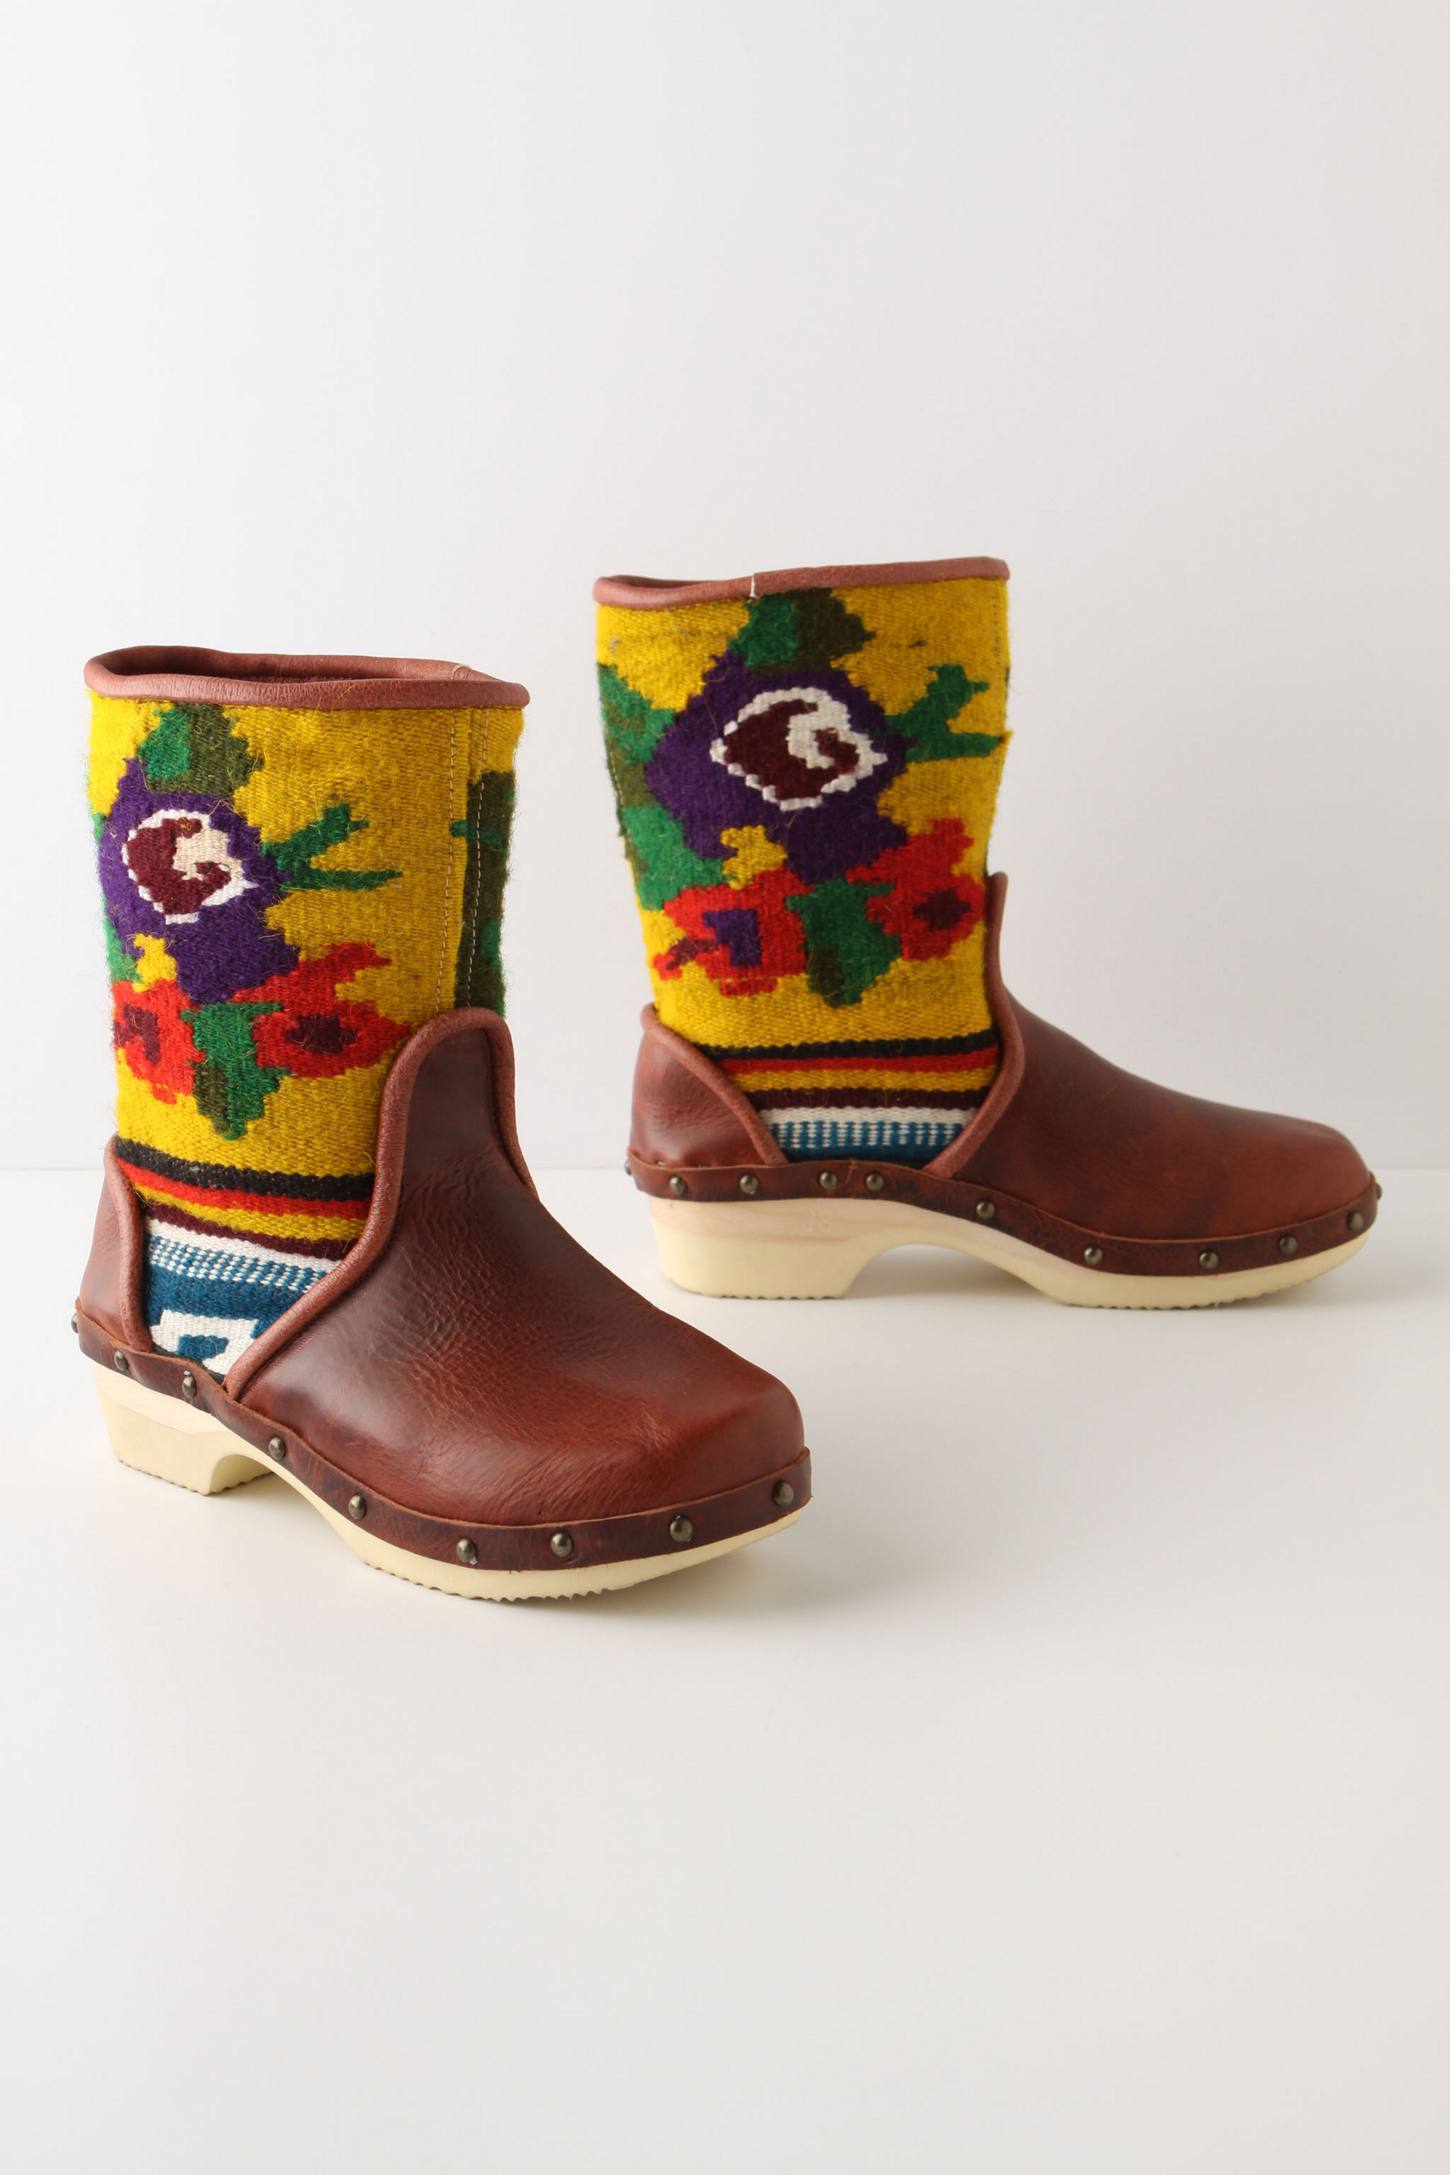 Vintage tapestry boots with yellow purple and green and red leg parts and brown toe 